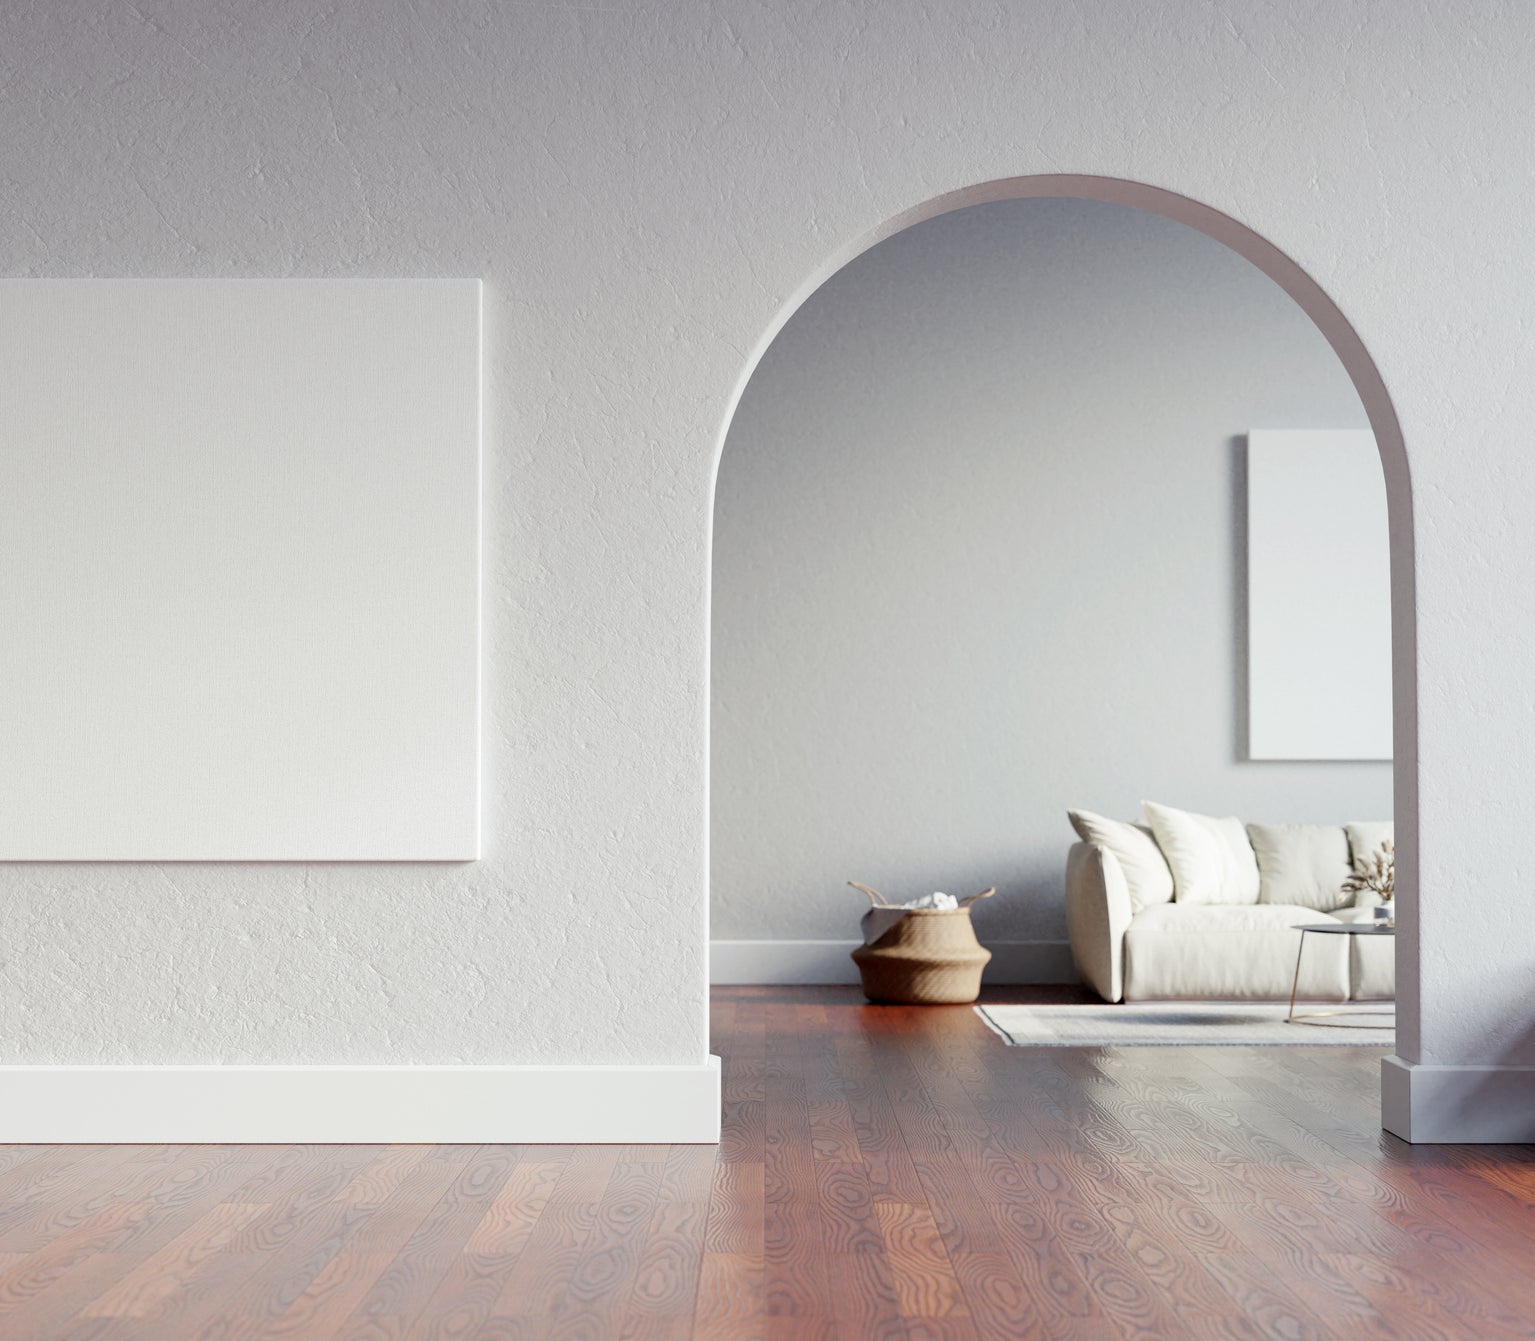 A minimalist room with an empty picture frame on the wall and a simple furnished living area through an archway